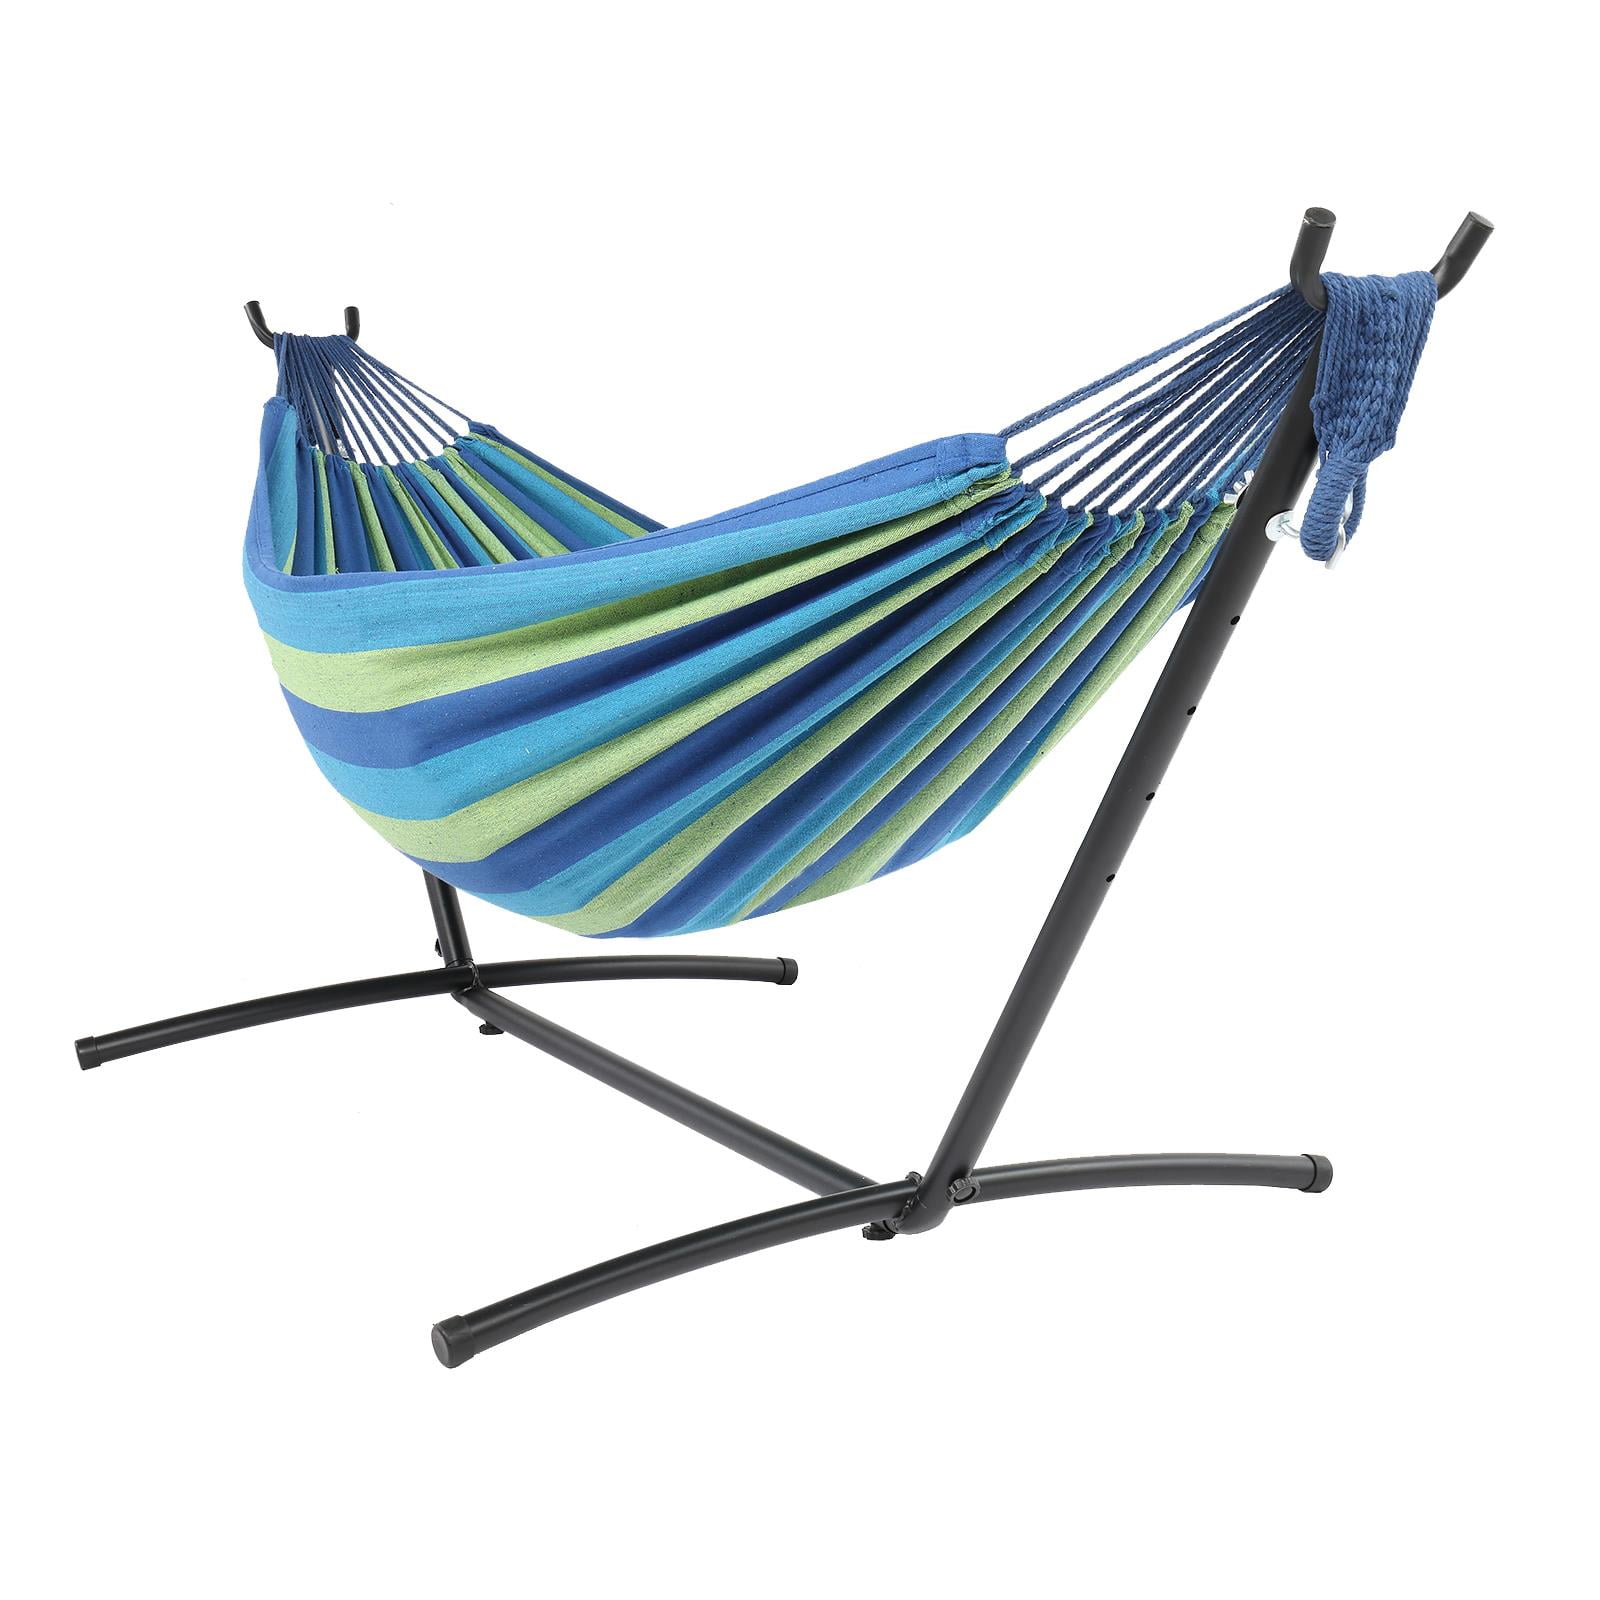 JUNELILY 9' Double Hammock with Steel Hammock Stand for Indoors and Outdoors